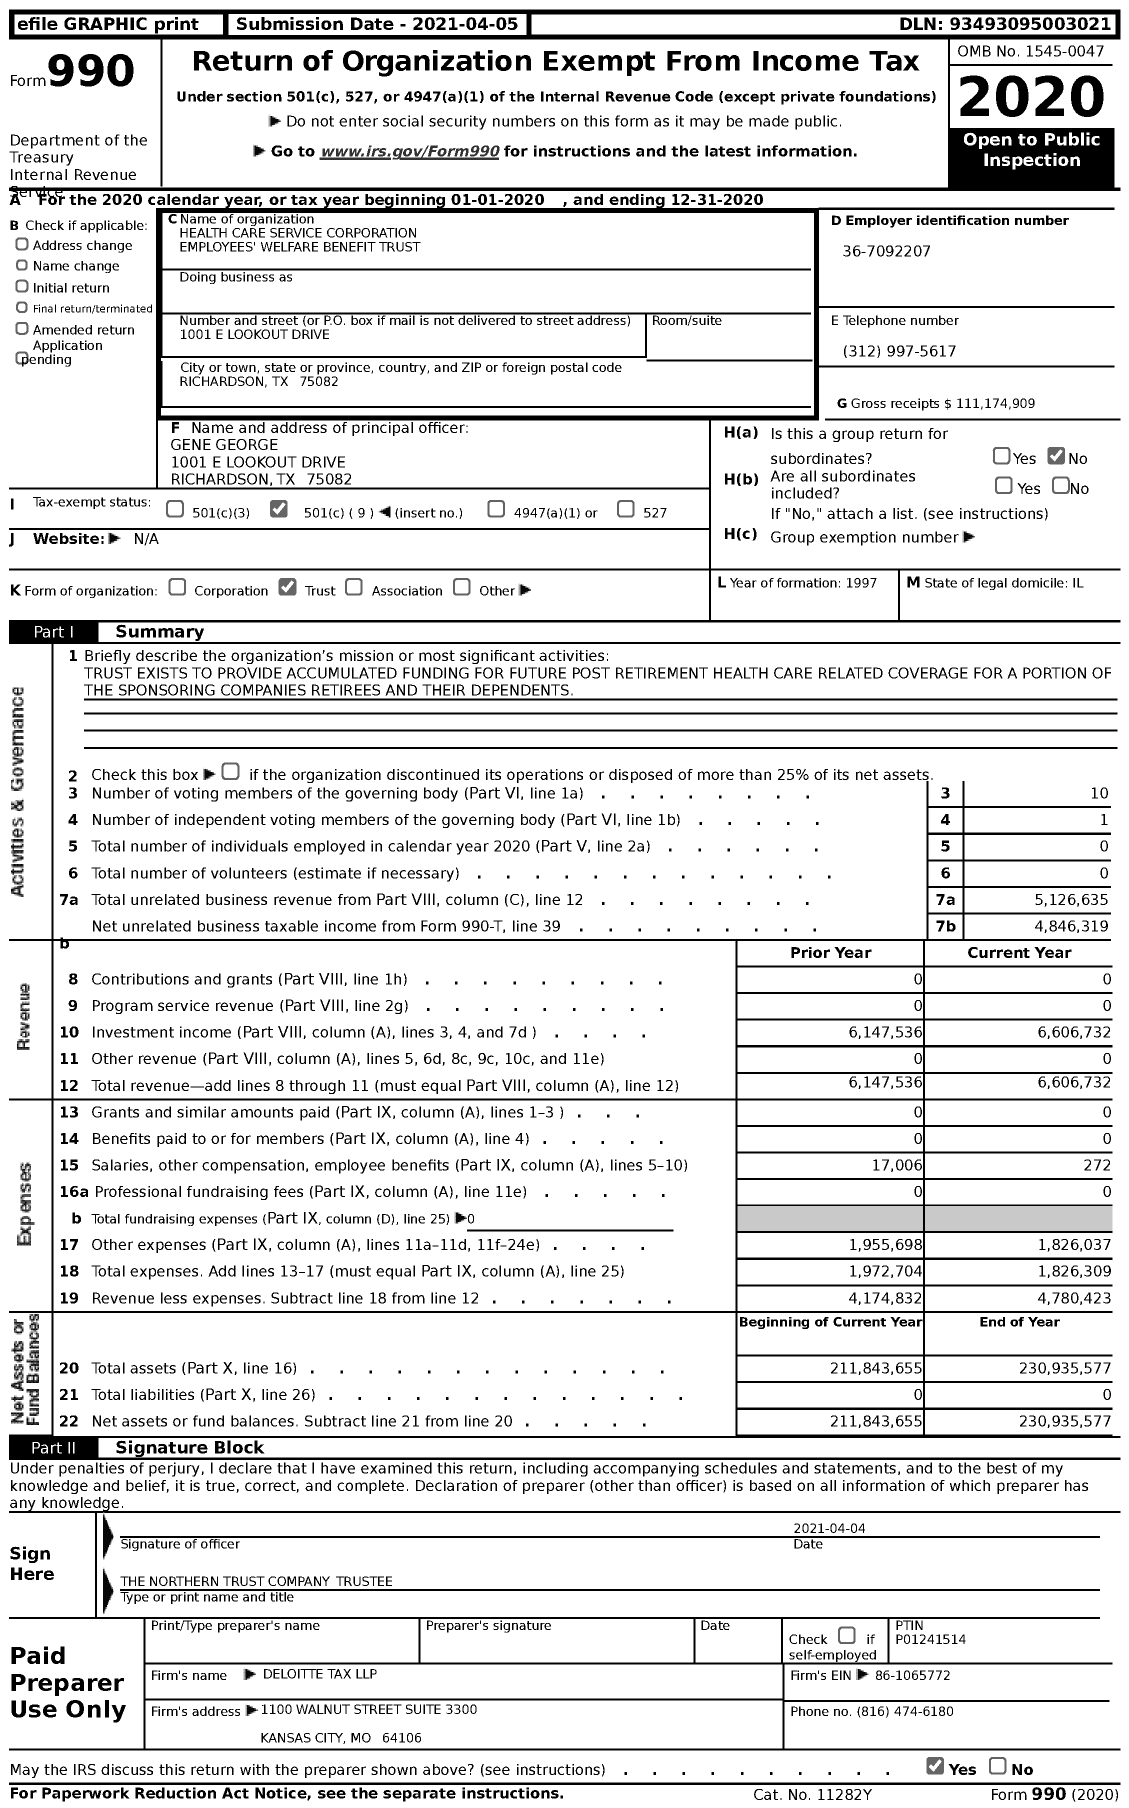 Image of first page of 2020 Form 990 for Health Care Service Corporation Employees' Welfare Benefit Trust